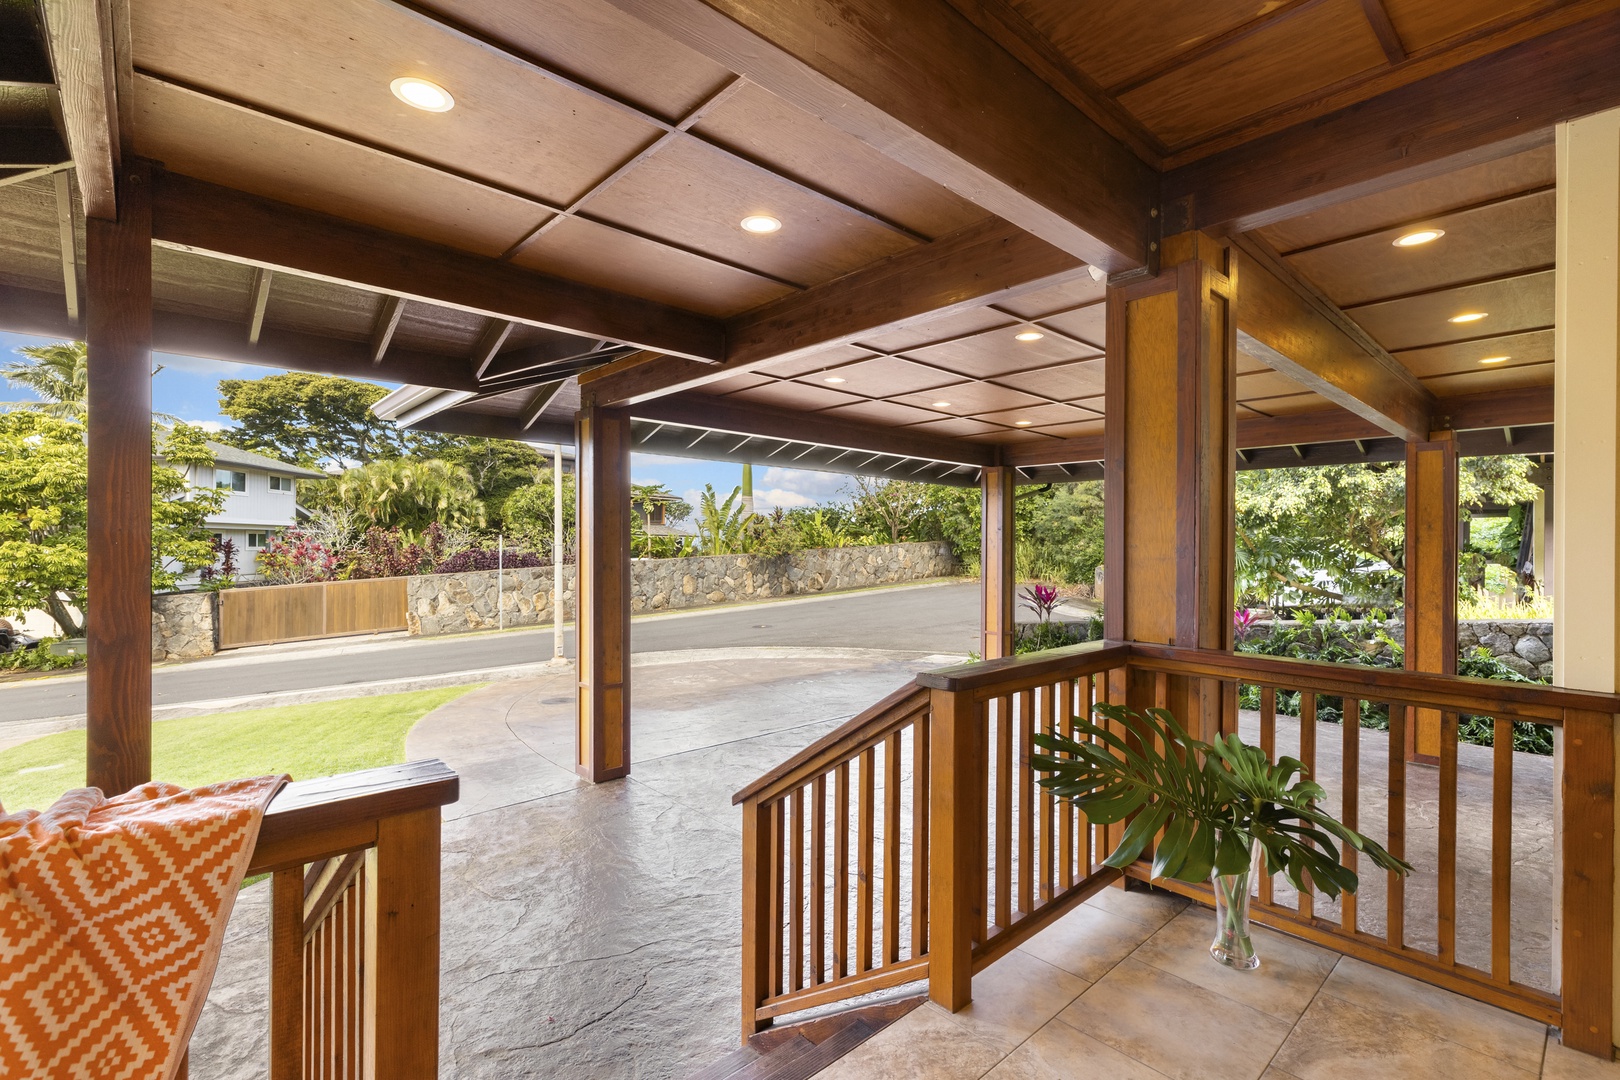 Haleiwa Vacation Rentals, Waimea Dream - The home is situated on a private cul-de-sac.